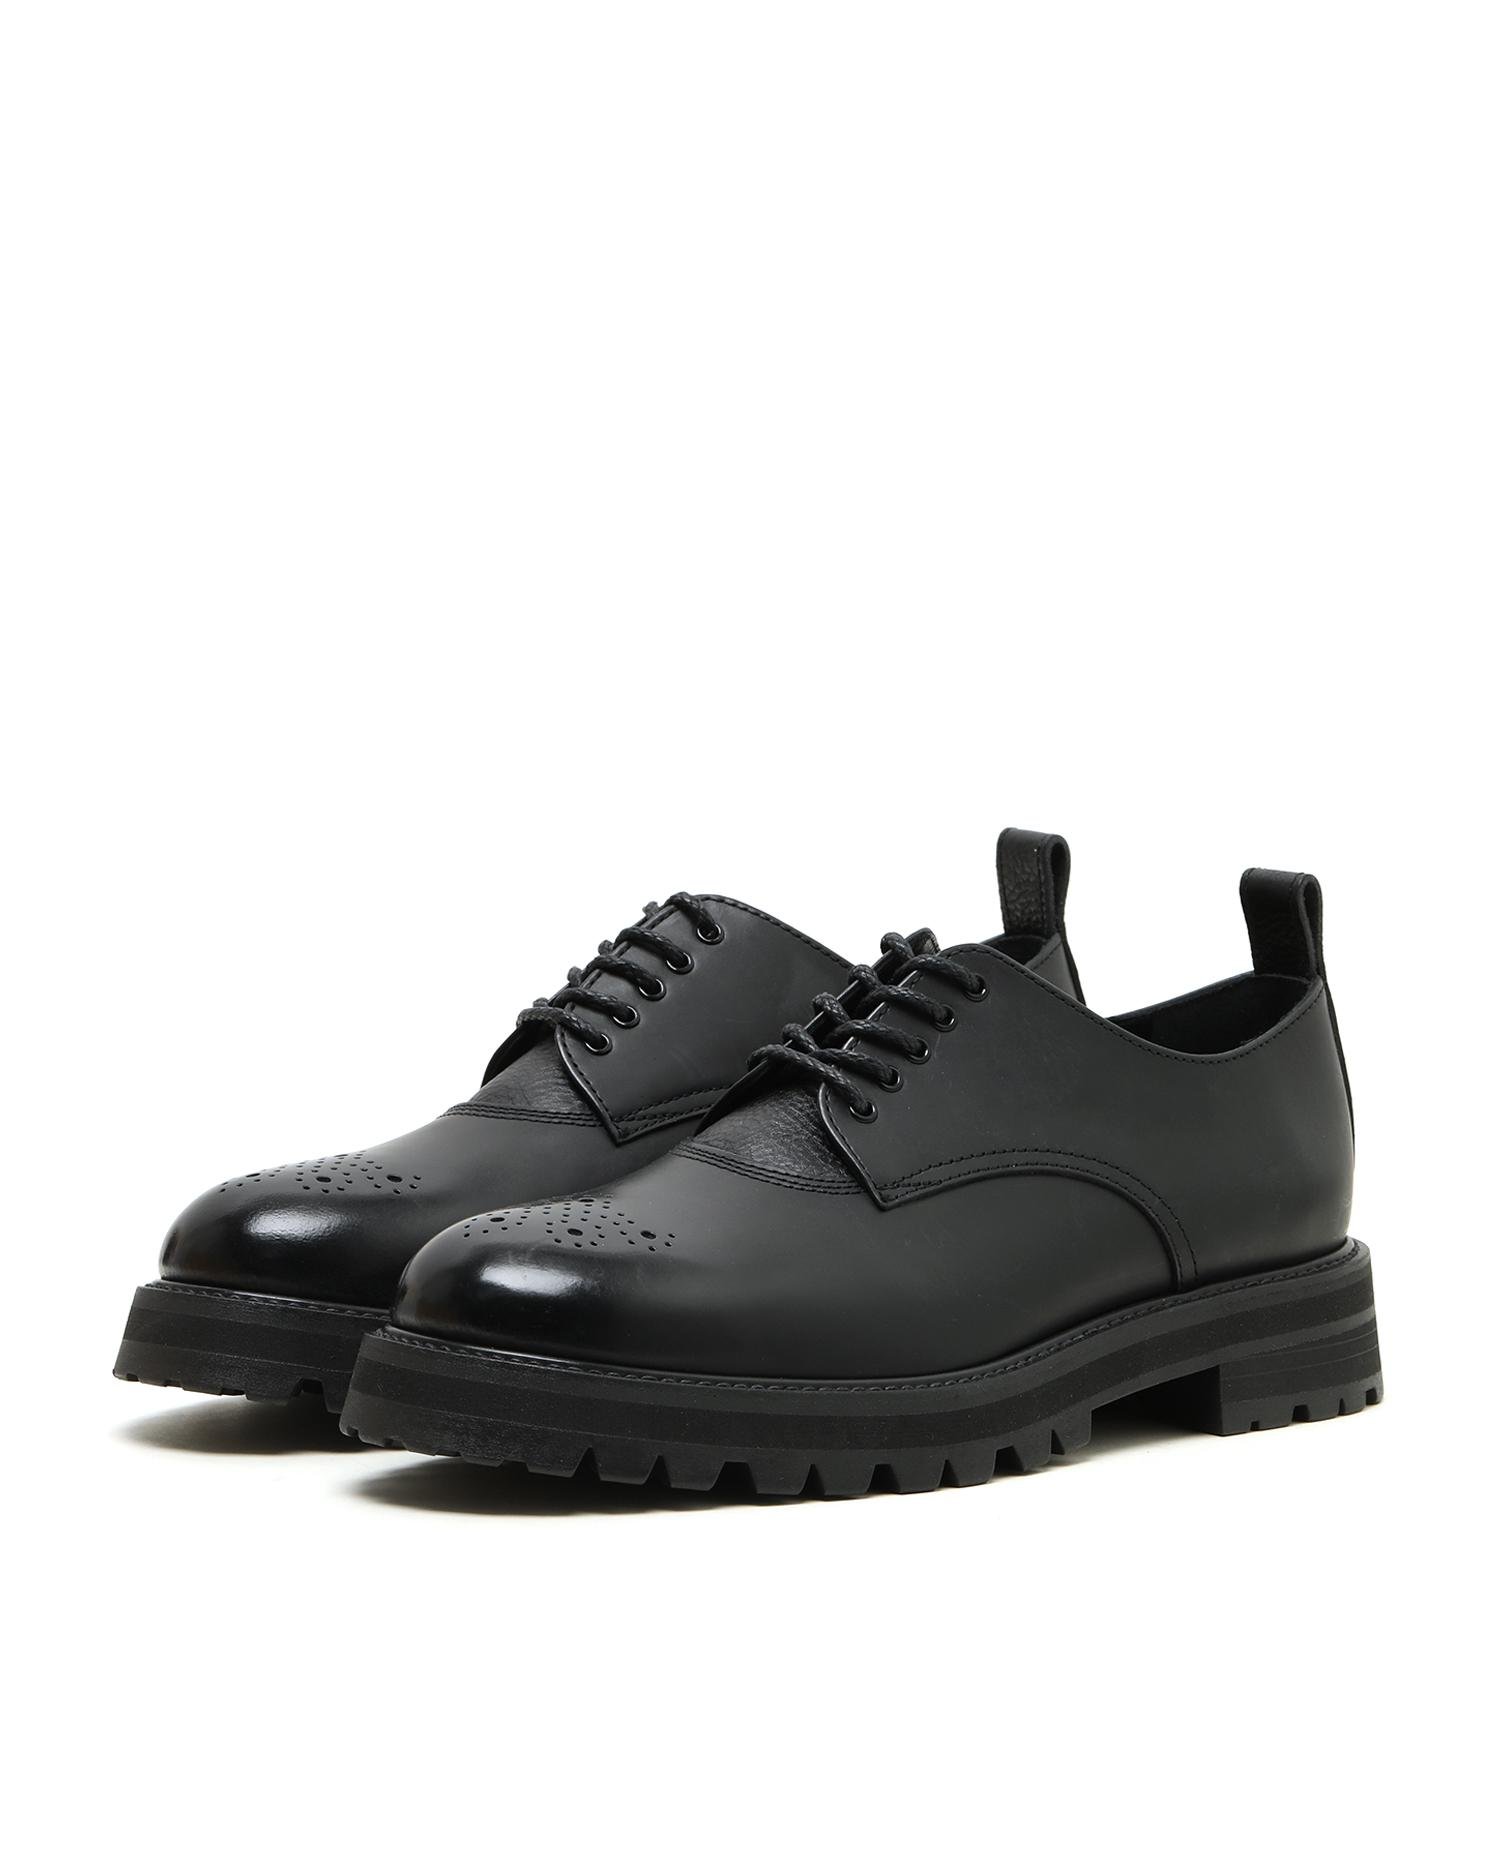 Leather Derby shoes by HENDER SCHEME